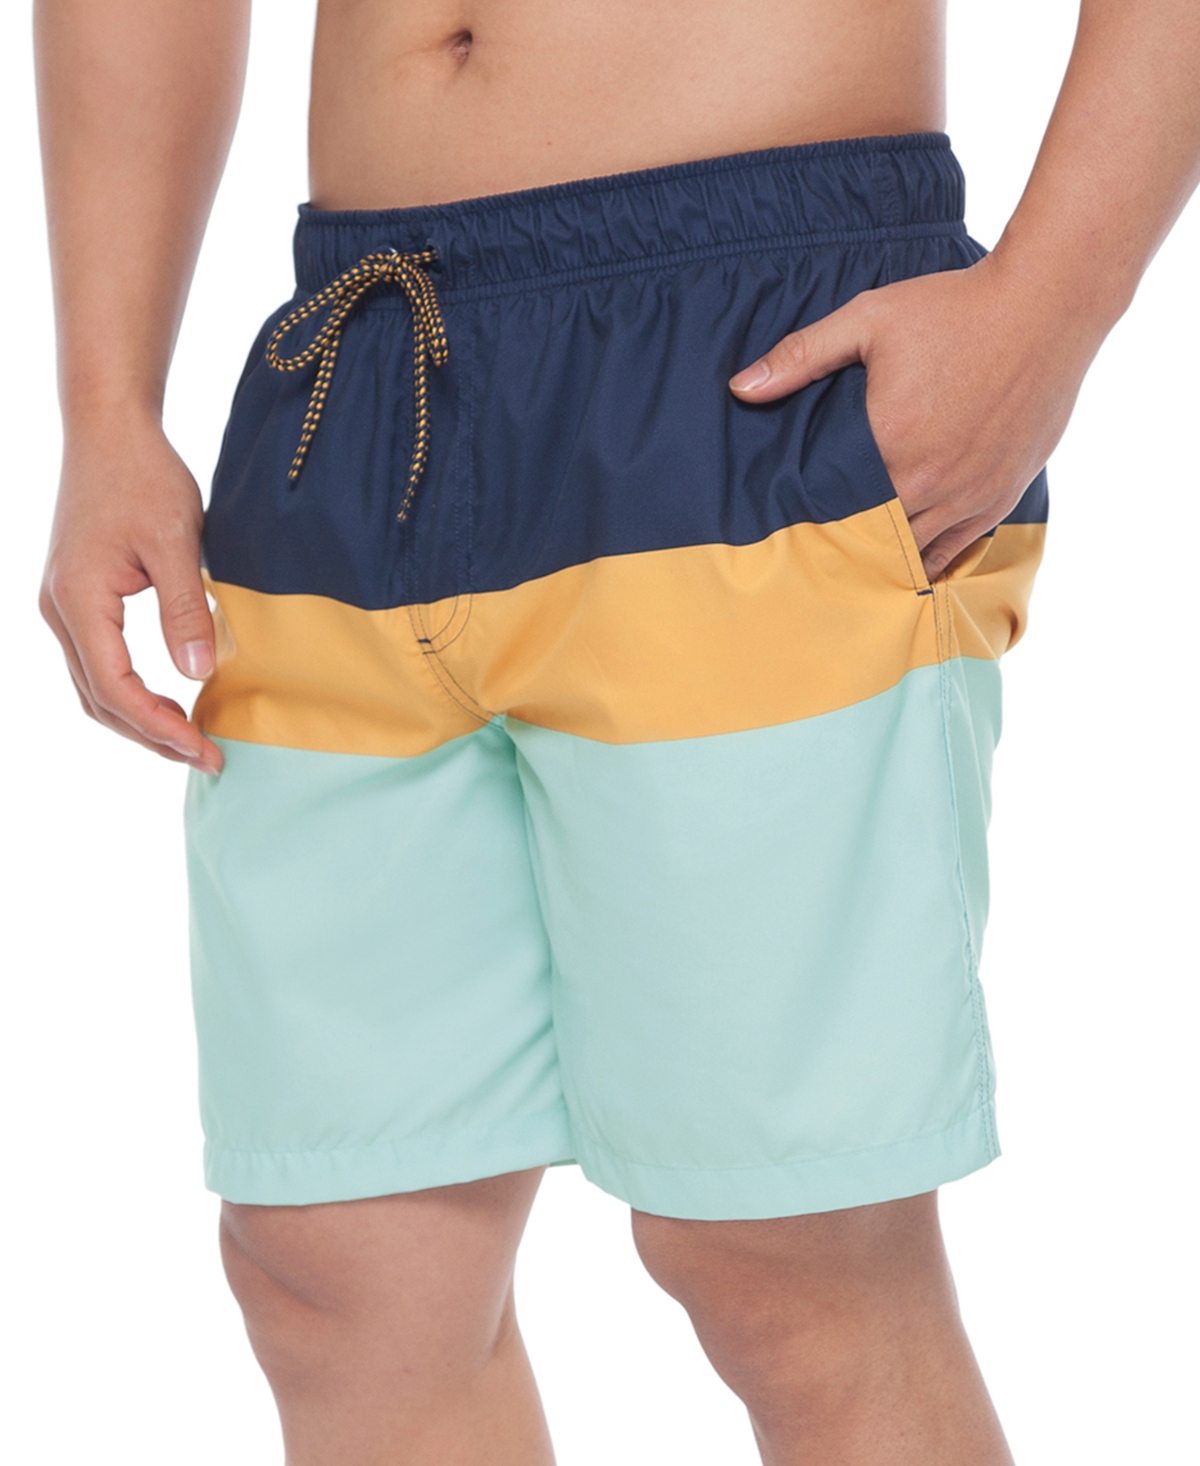 Men's 8" Mesh Lined Swim Trunks, up to Size 2XL - Navy mustard